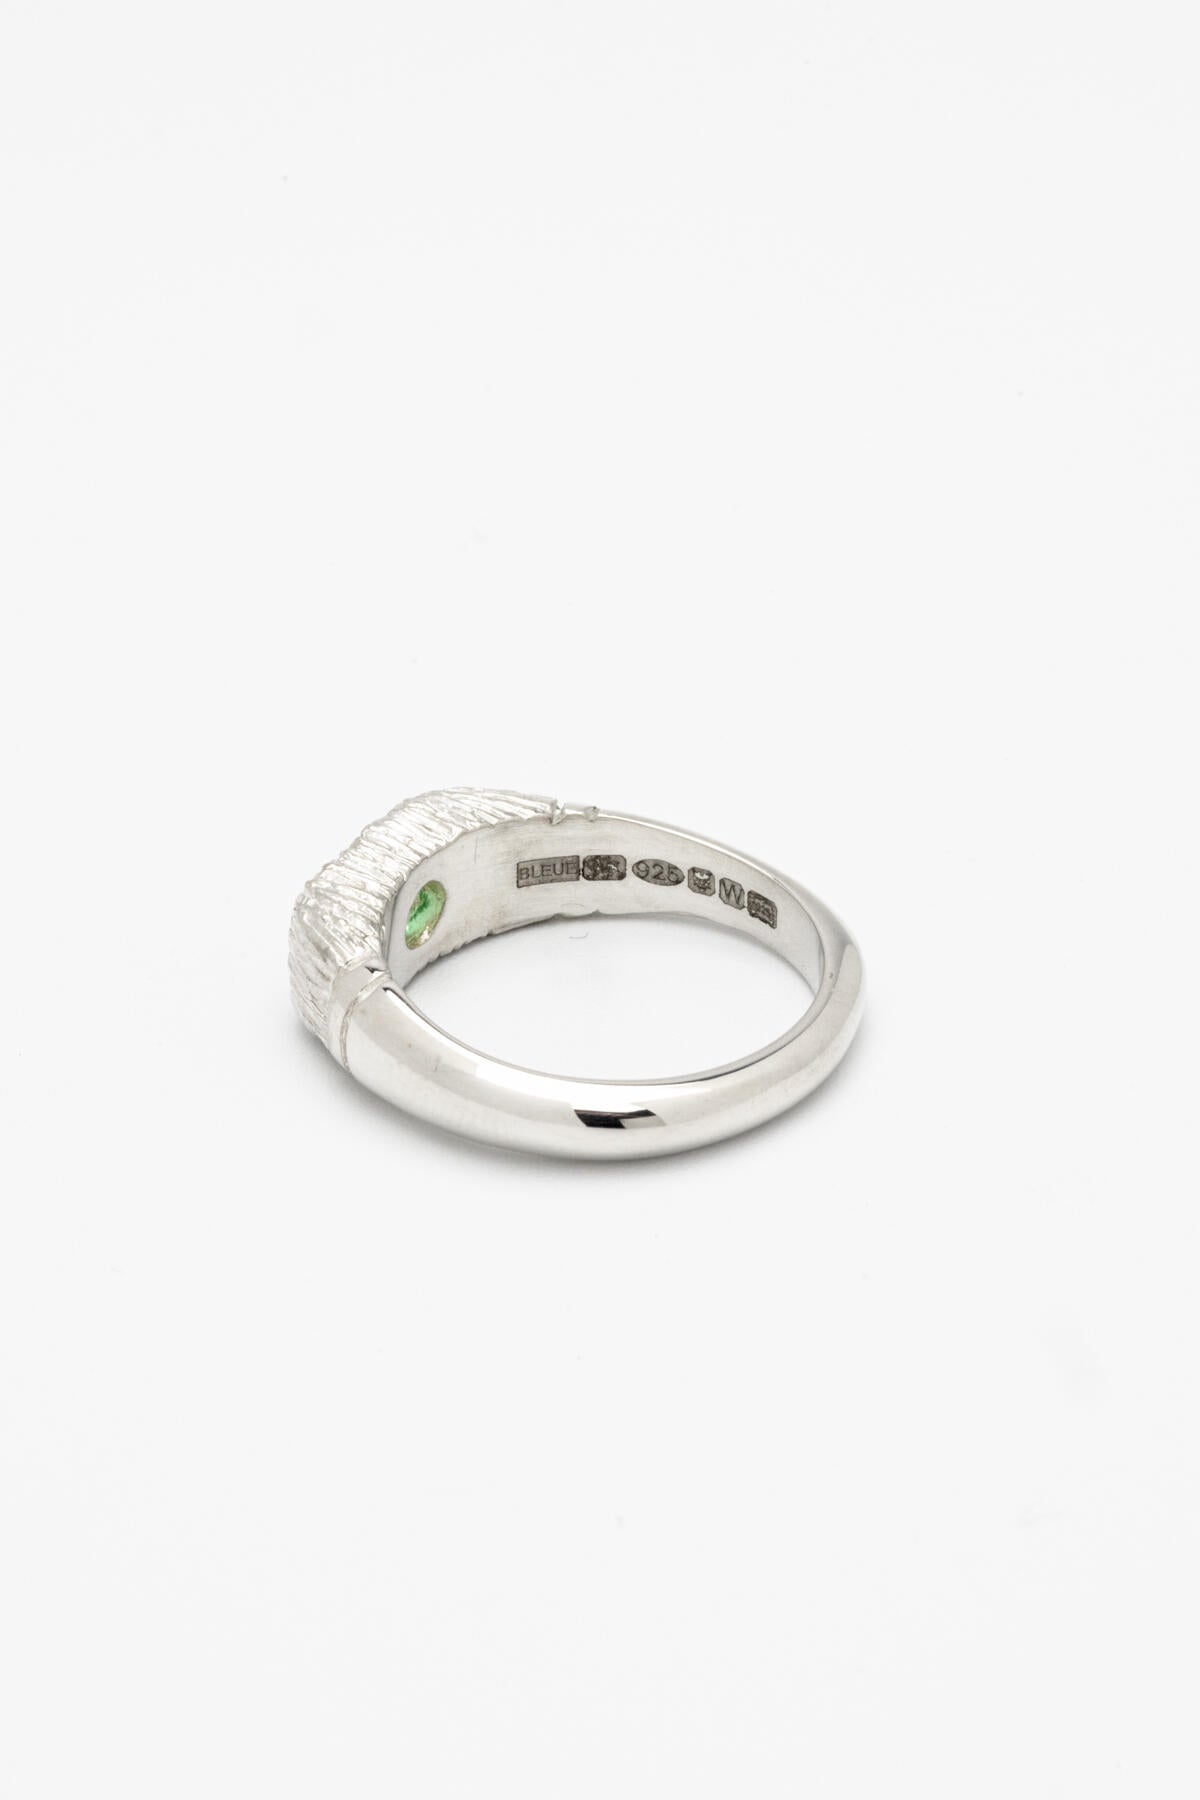 Hand Me Down Ring - Green